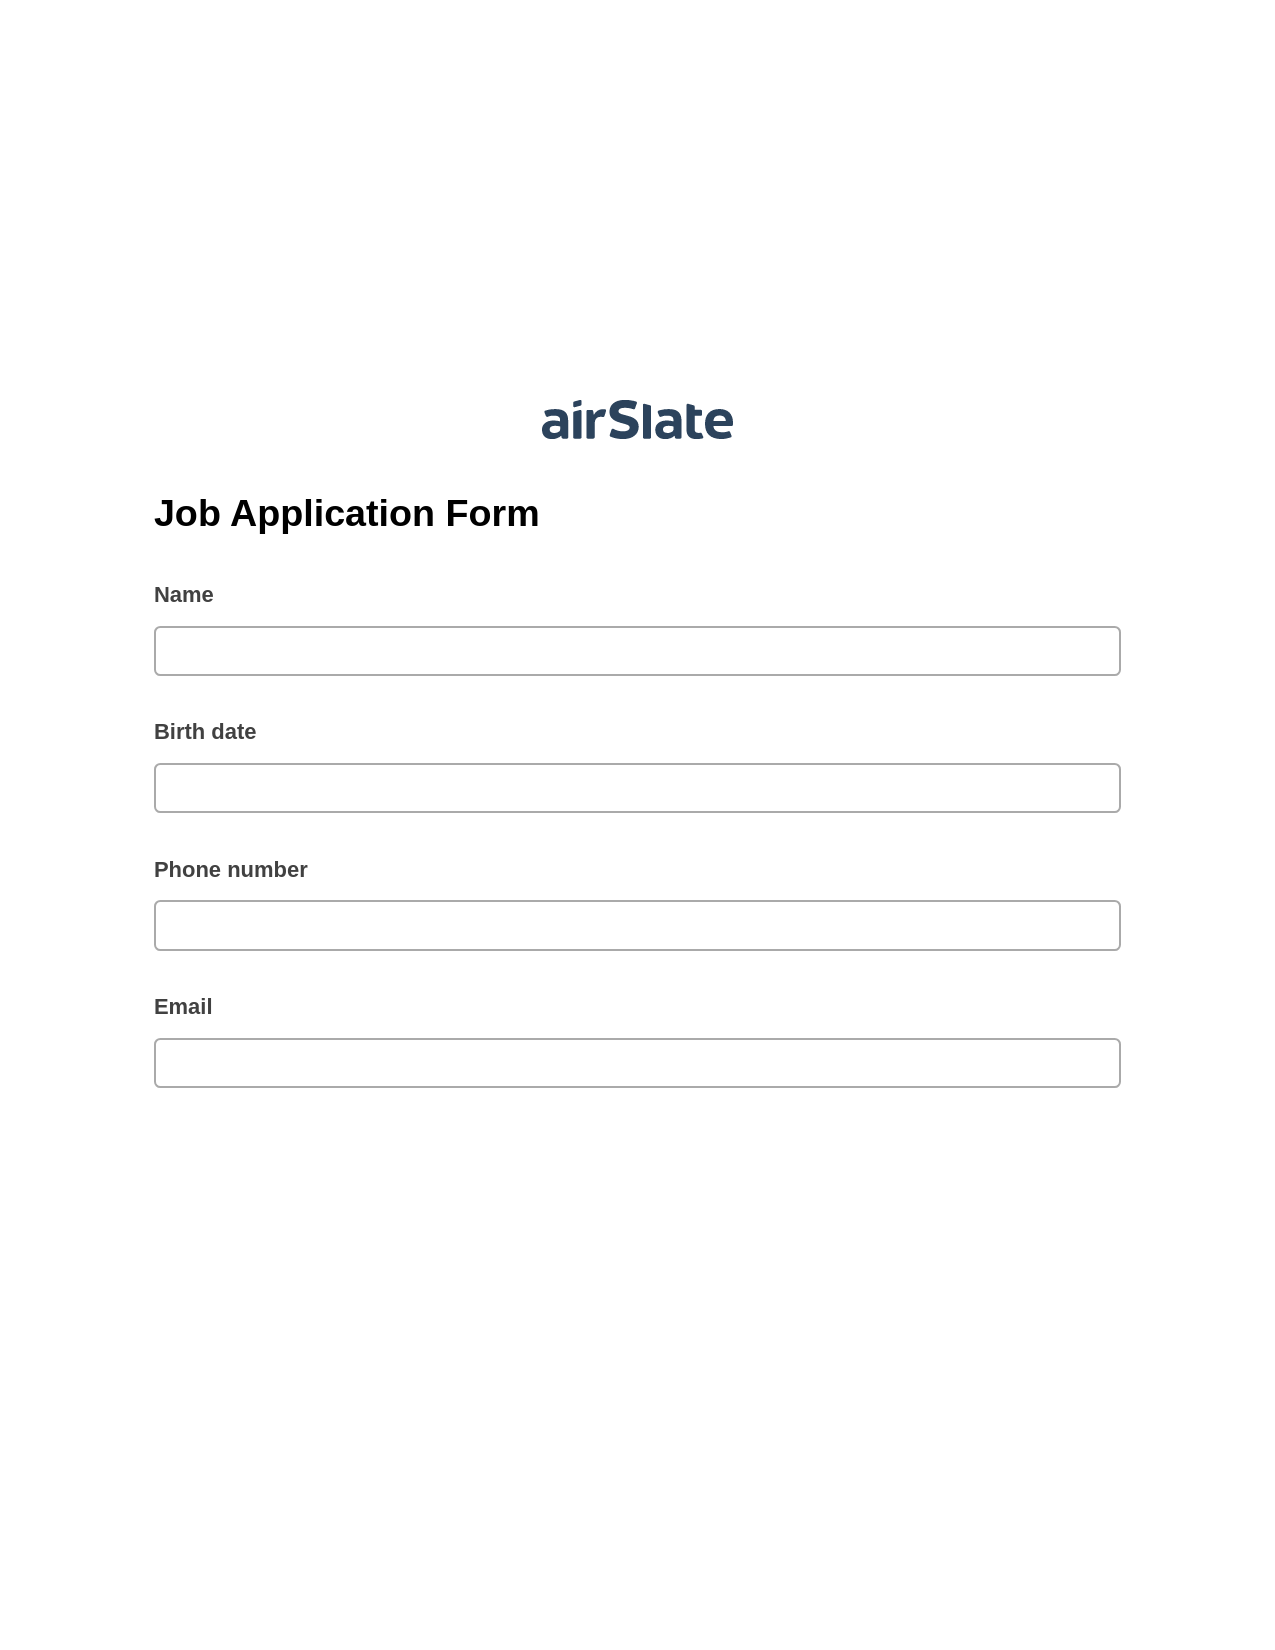 Job Application Form Pre-fill from Salesforce Records with SOQL Bot, Invoke Salesforce Process Bot, Export to Formstack Documents Bot